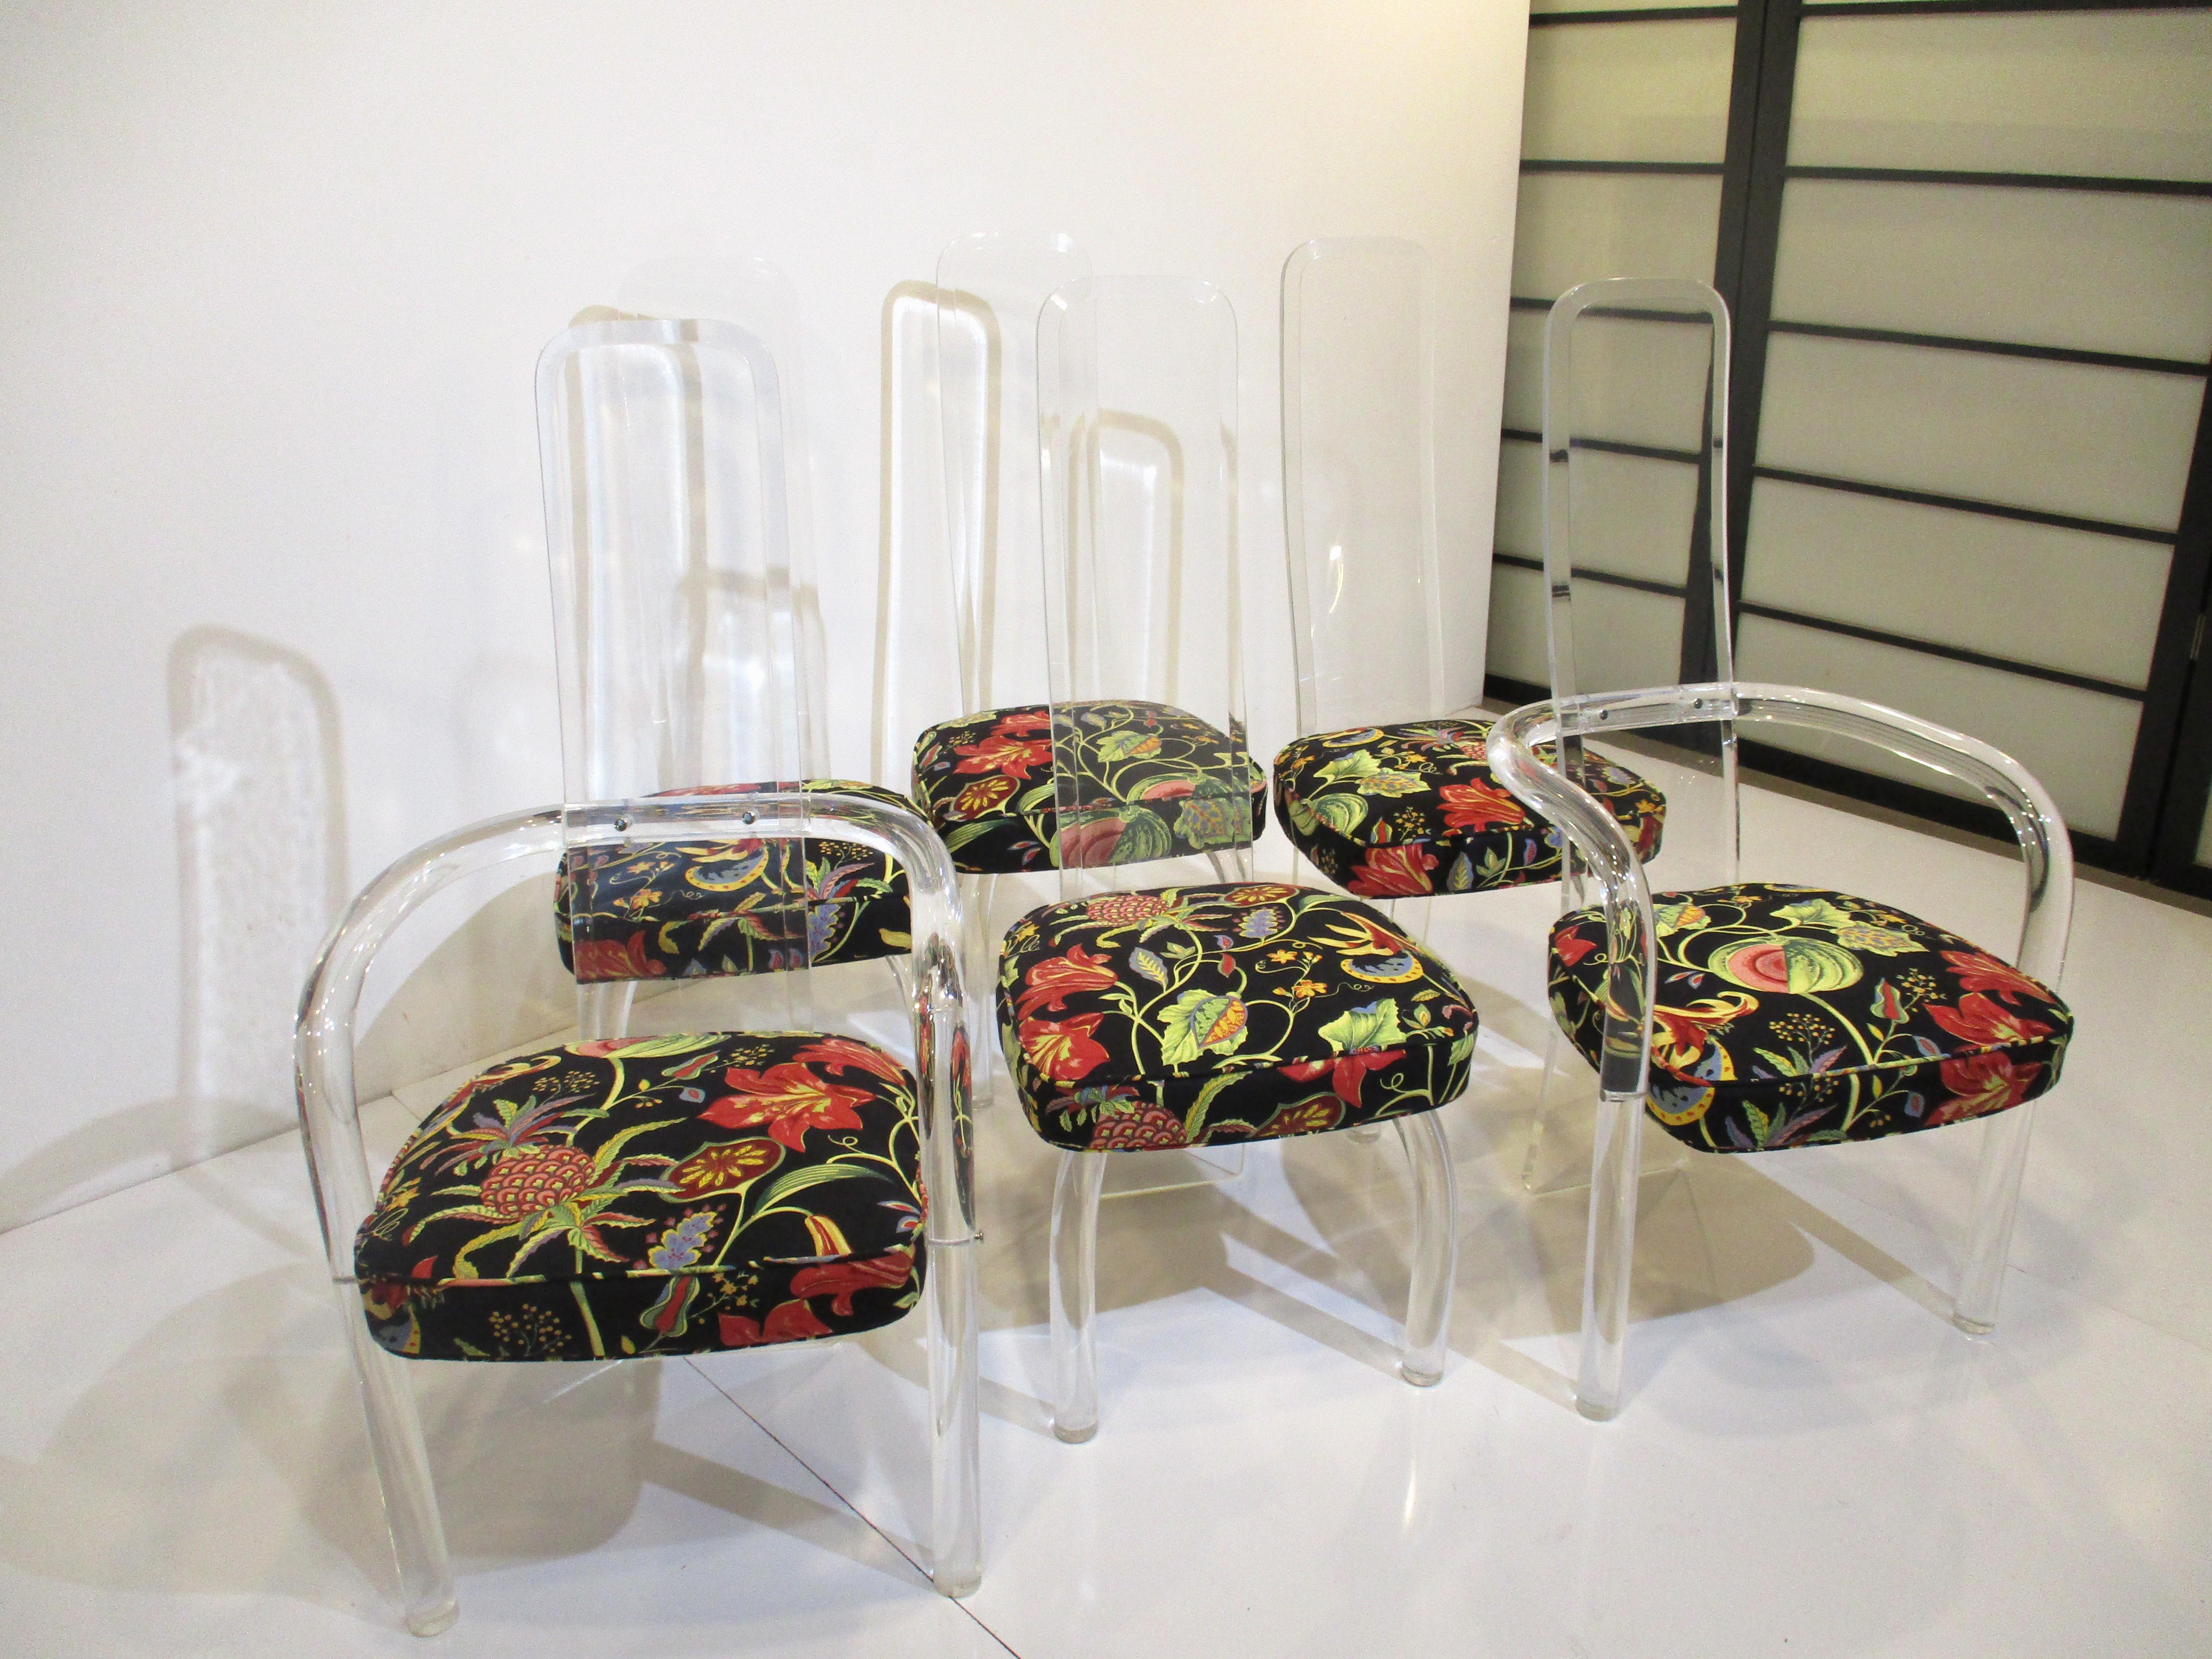 A set of six high back Lucite dining chairs with four side chairs and two chairs having sculptural arms . The back forms the back leg structure and is detailed with chrome studs at the screw points all with high quality multi colored fabric seat